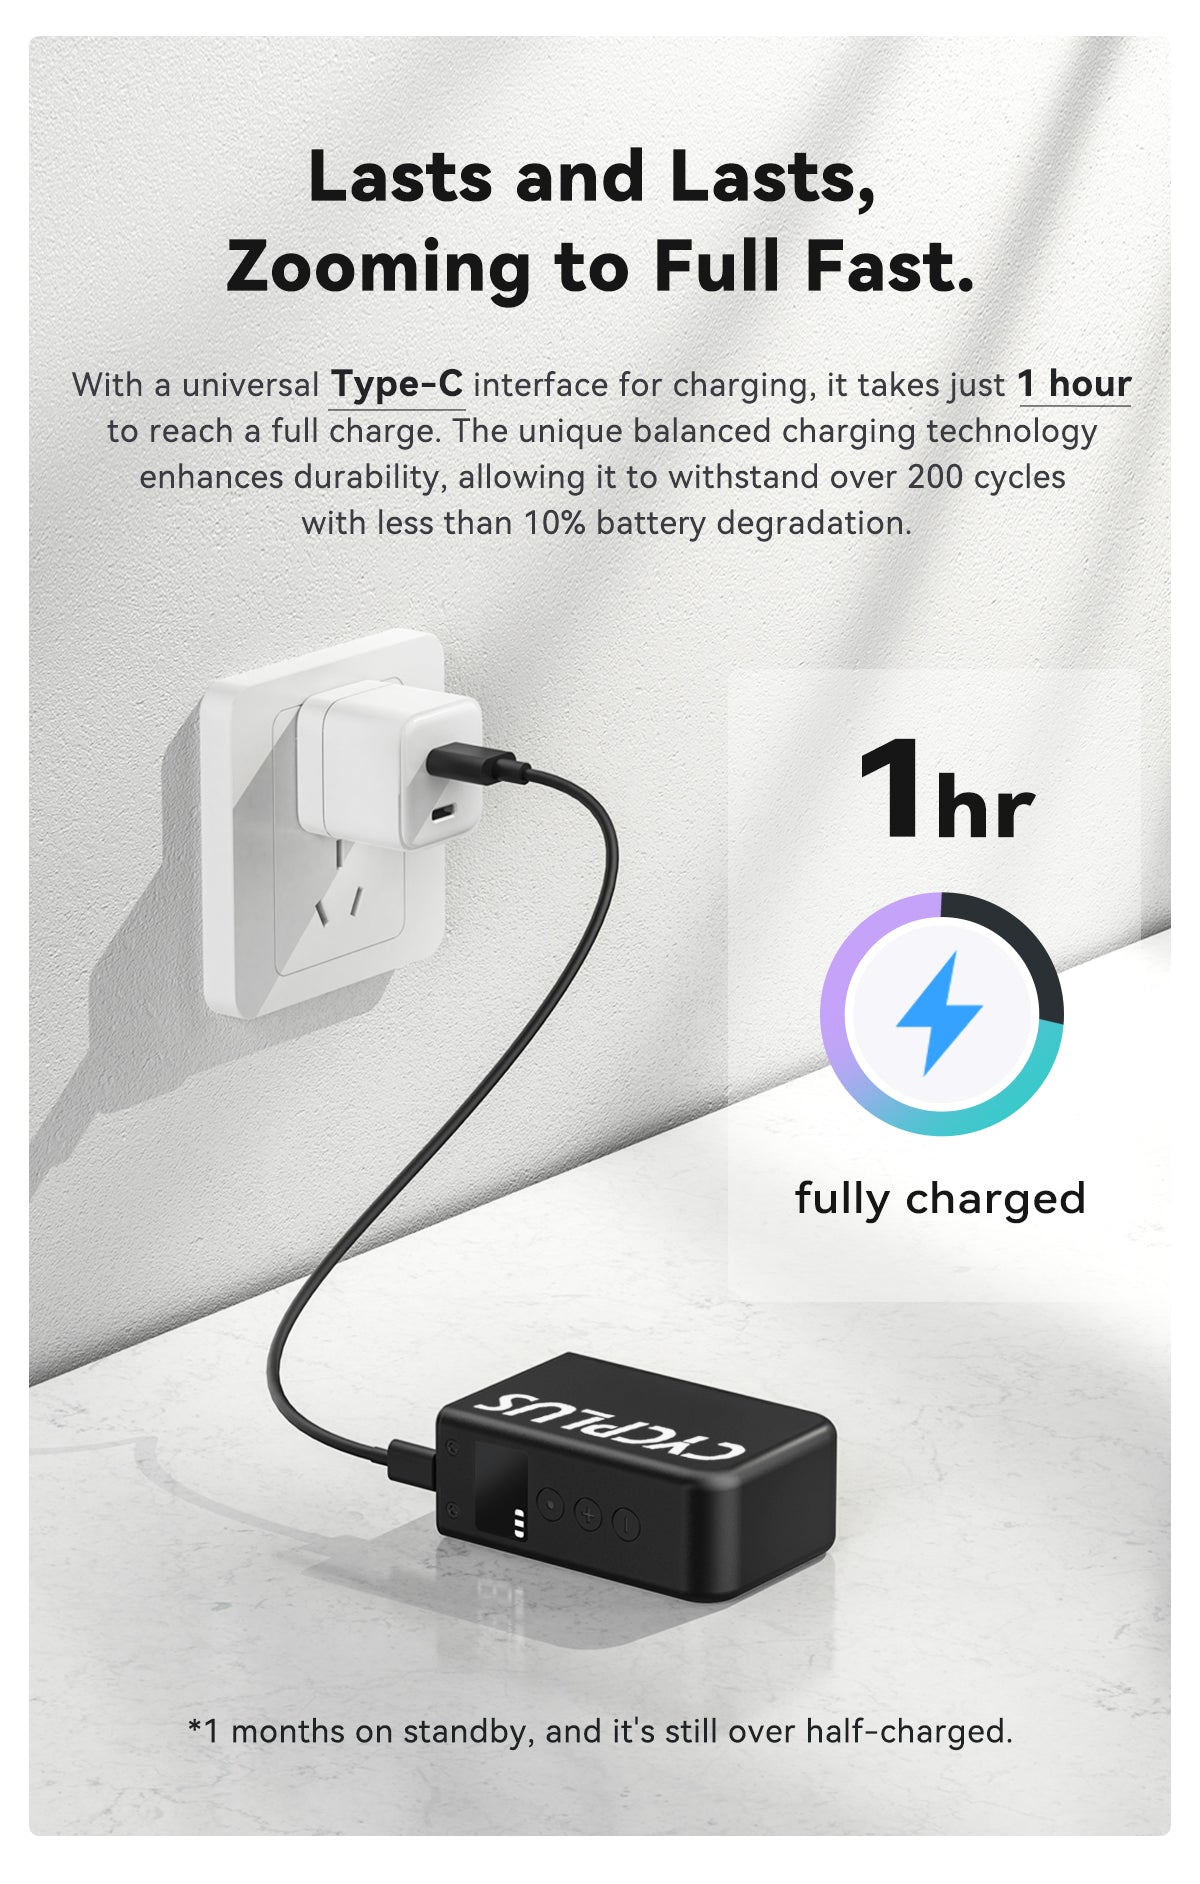 Lasts and Lasts, Zooming to Full Fast.  With a universal Type-C interface for charging, it takes just 1 hour to reach a full charge. The unique balanced charging technology enhances durability, allowing it to withstand over 200 cycles with less than 10% battery degradation.  1 hr fully charged  *1 months on standby, and it's still over half-charged.